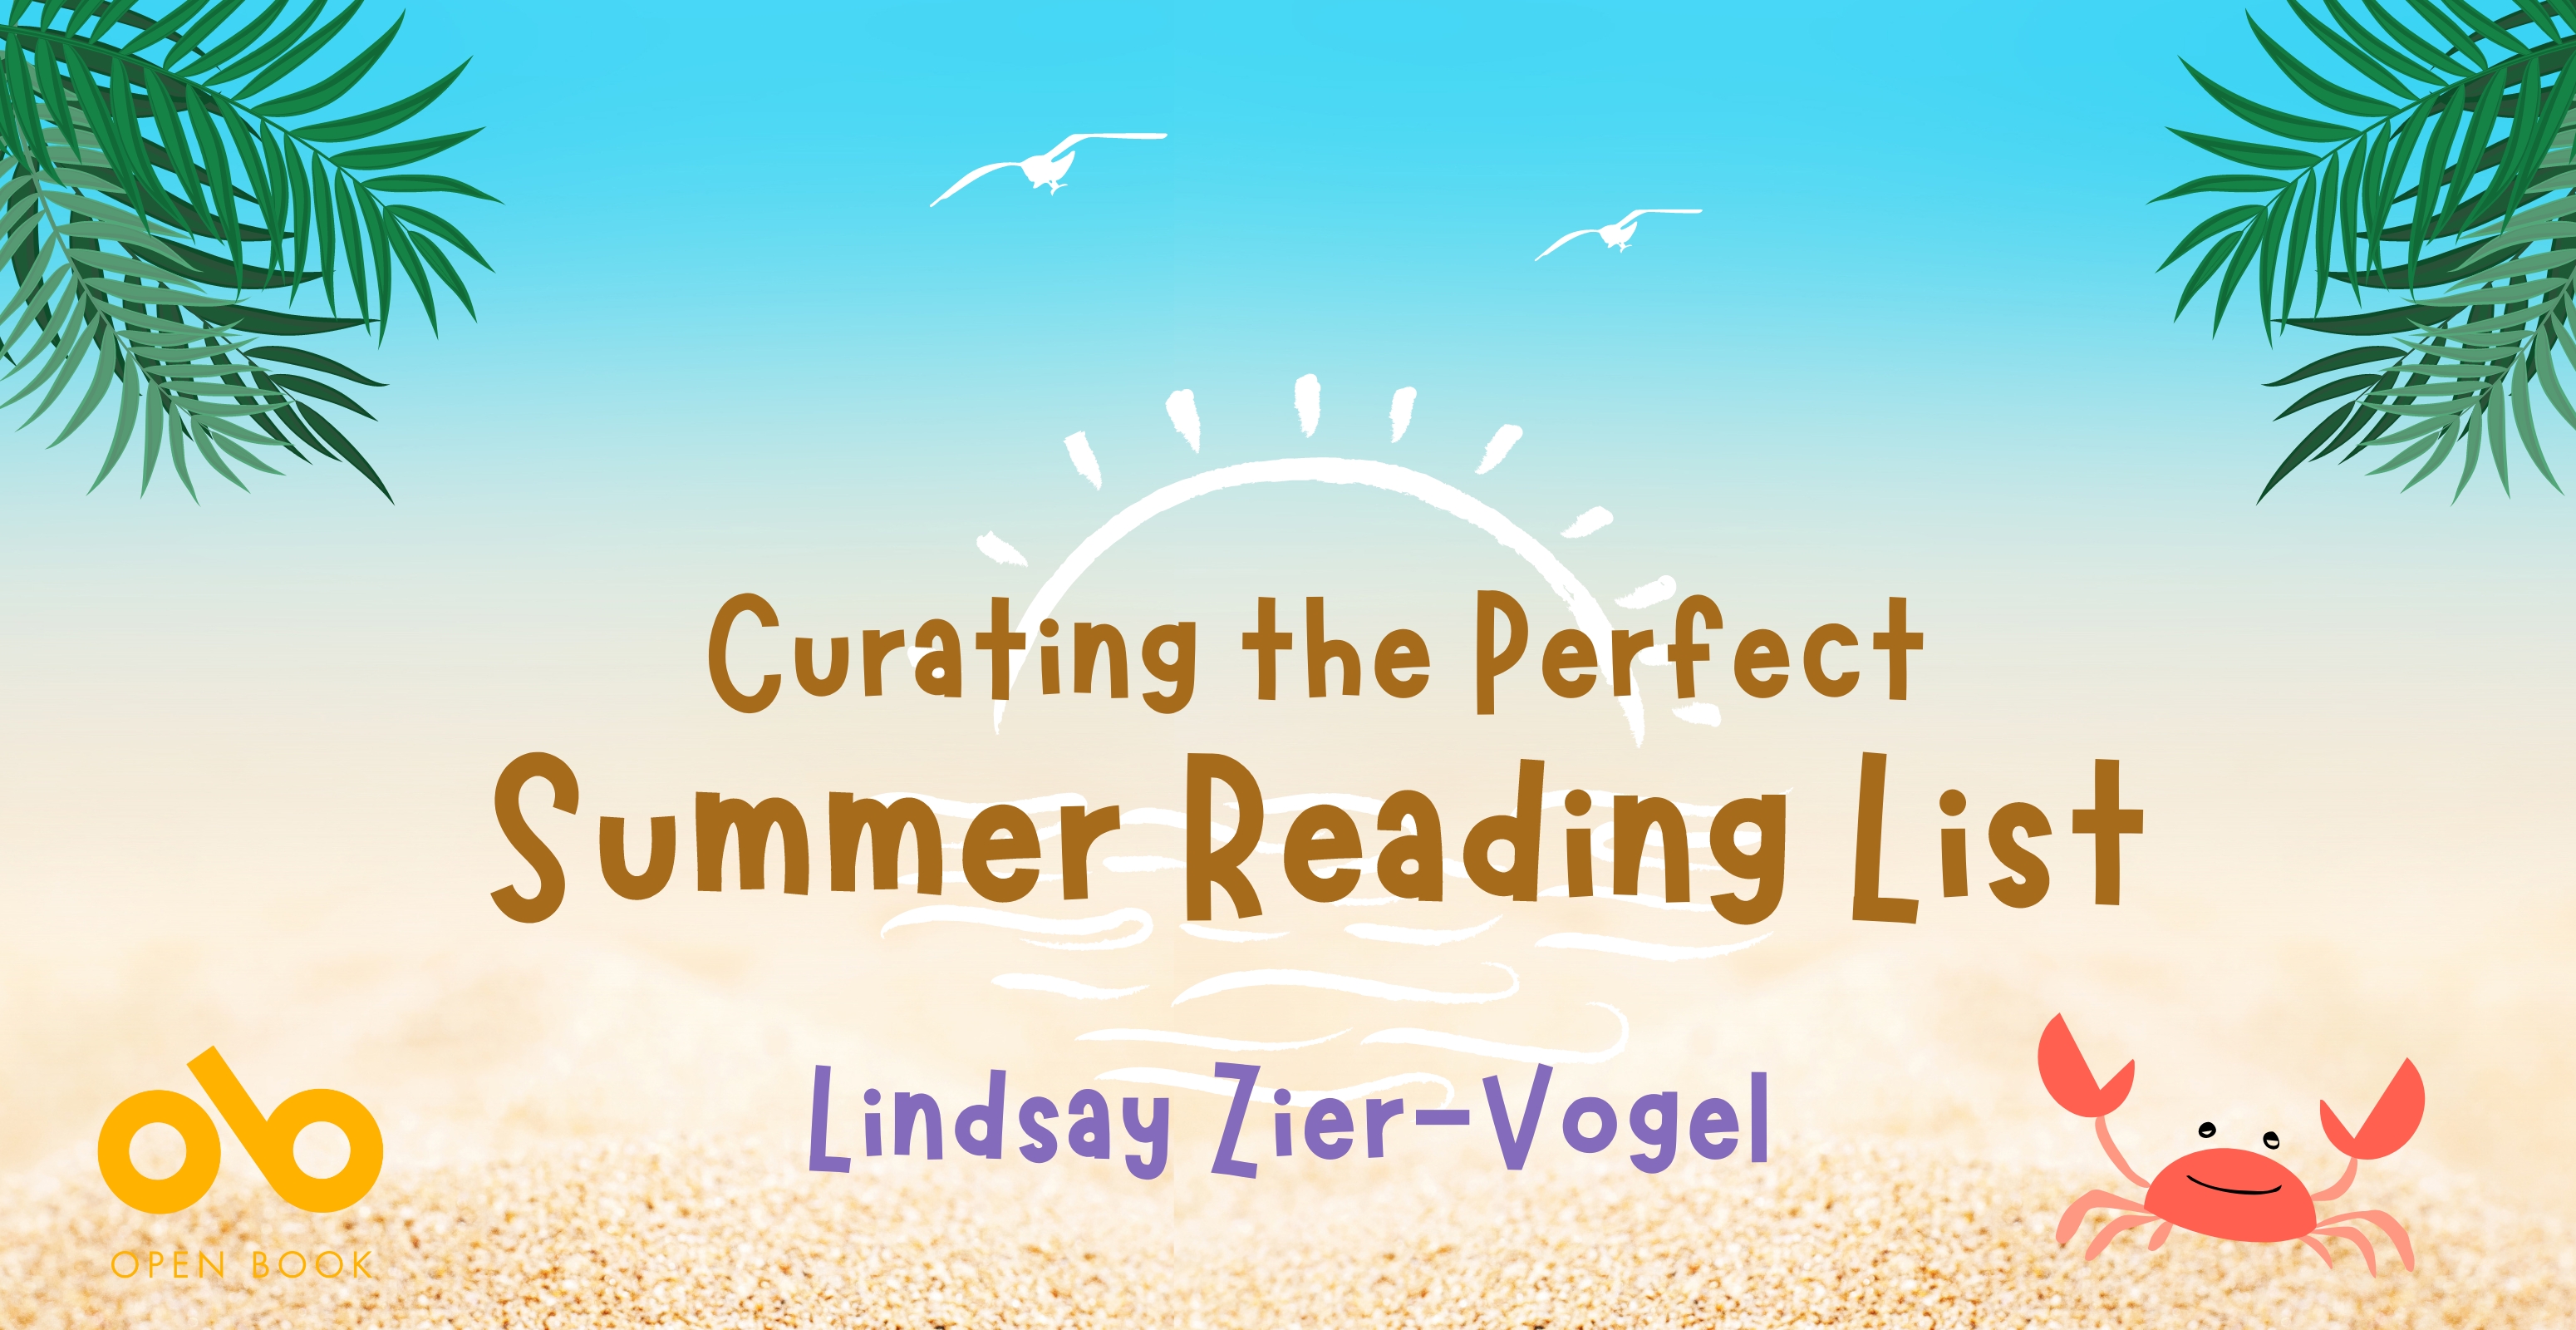 Curating the Perfect Summer Reading List - Lindsay Zier-Vogel